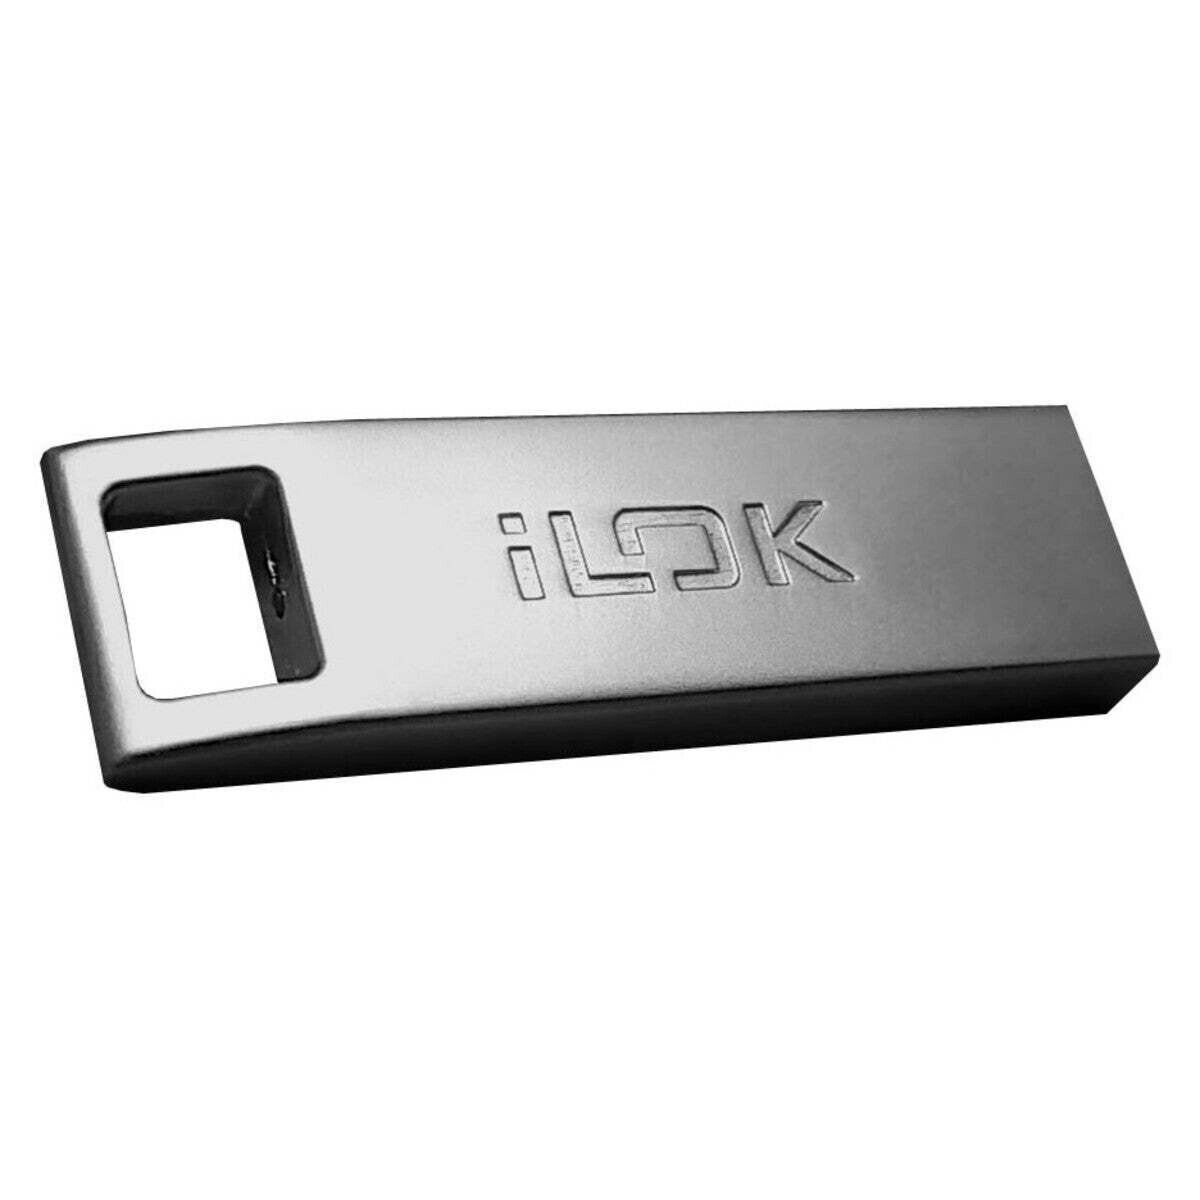 Avid 99006503300 Pace ILOK 3rd Software Authorization Device Holds 1500 Licenses